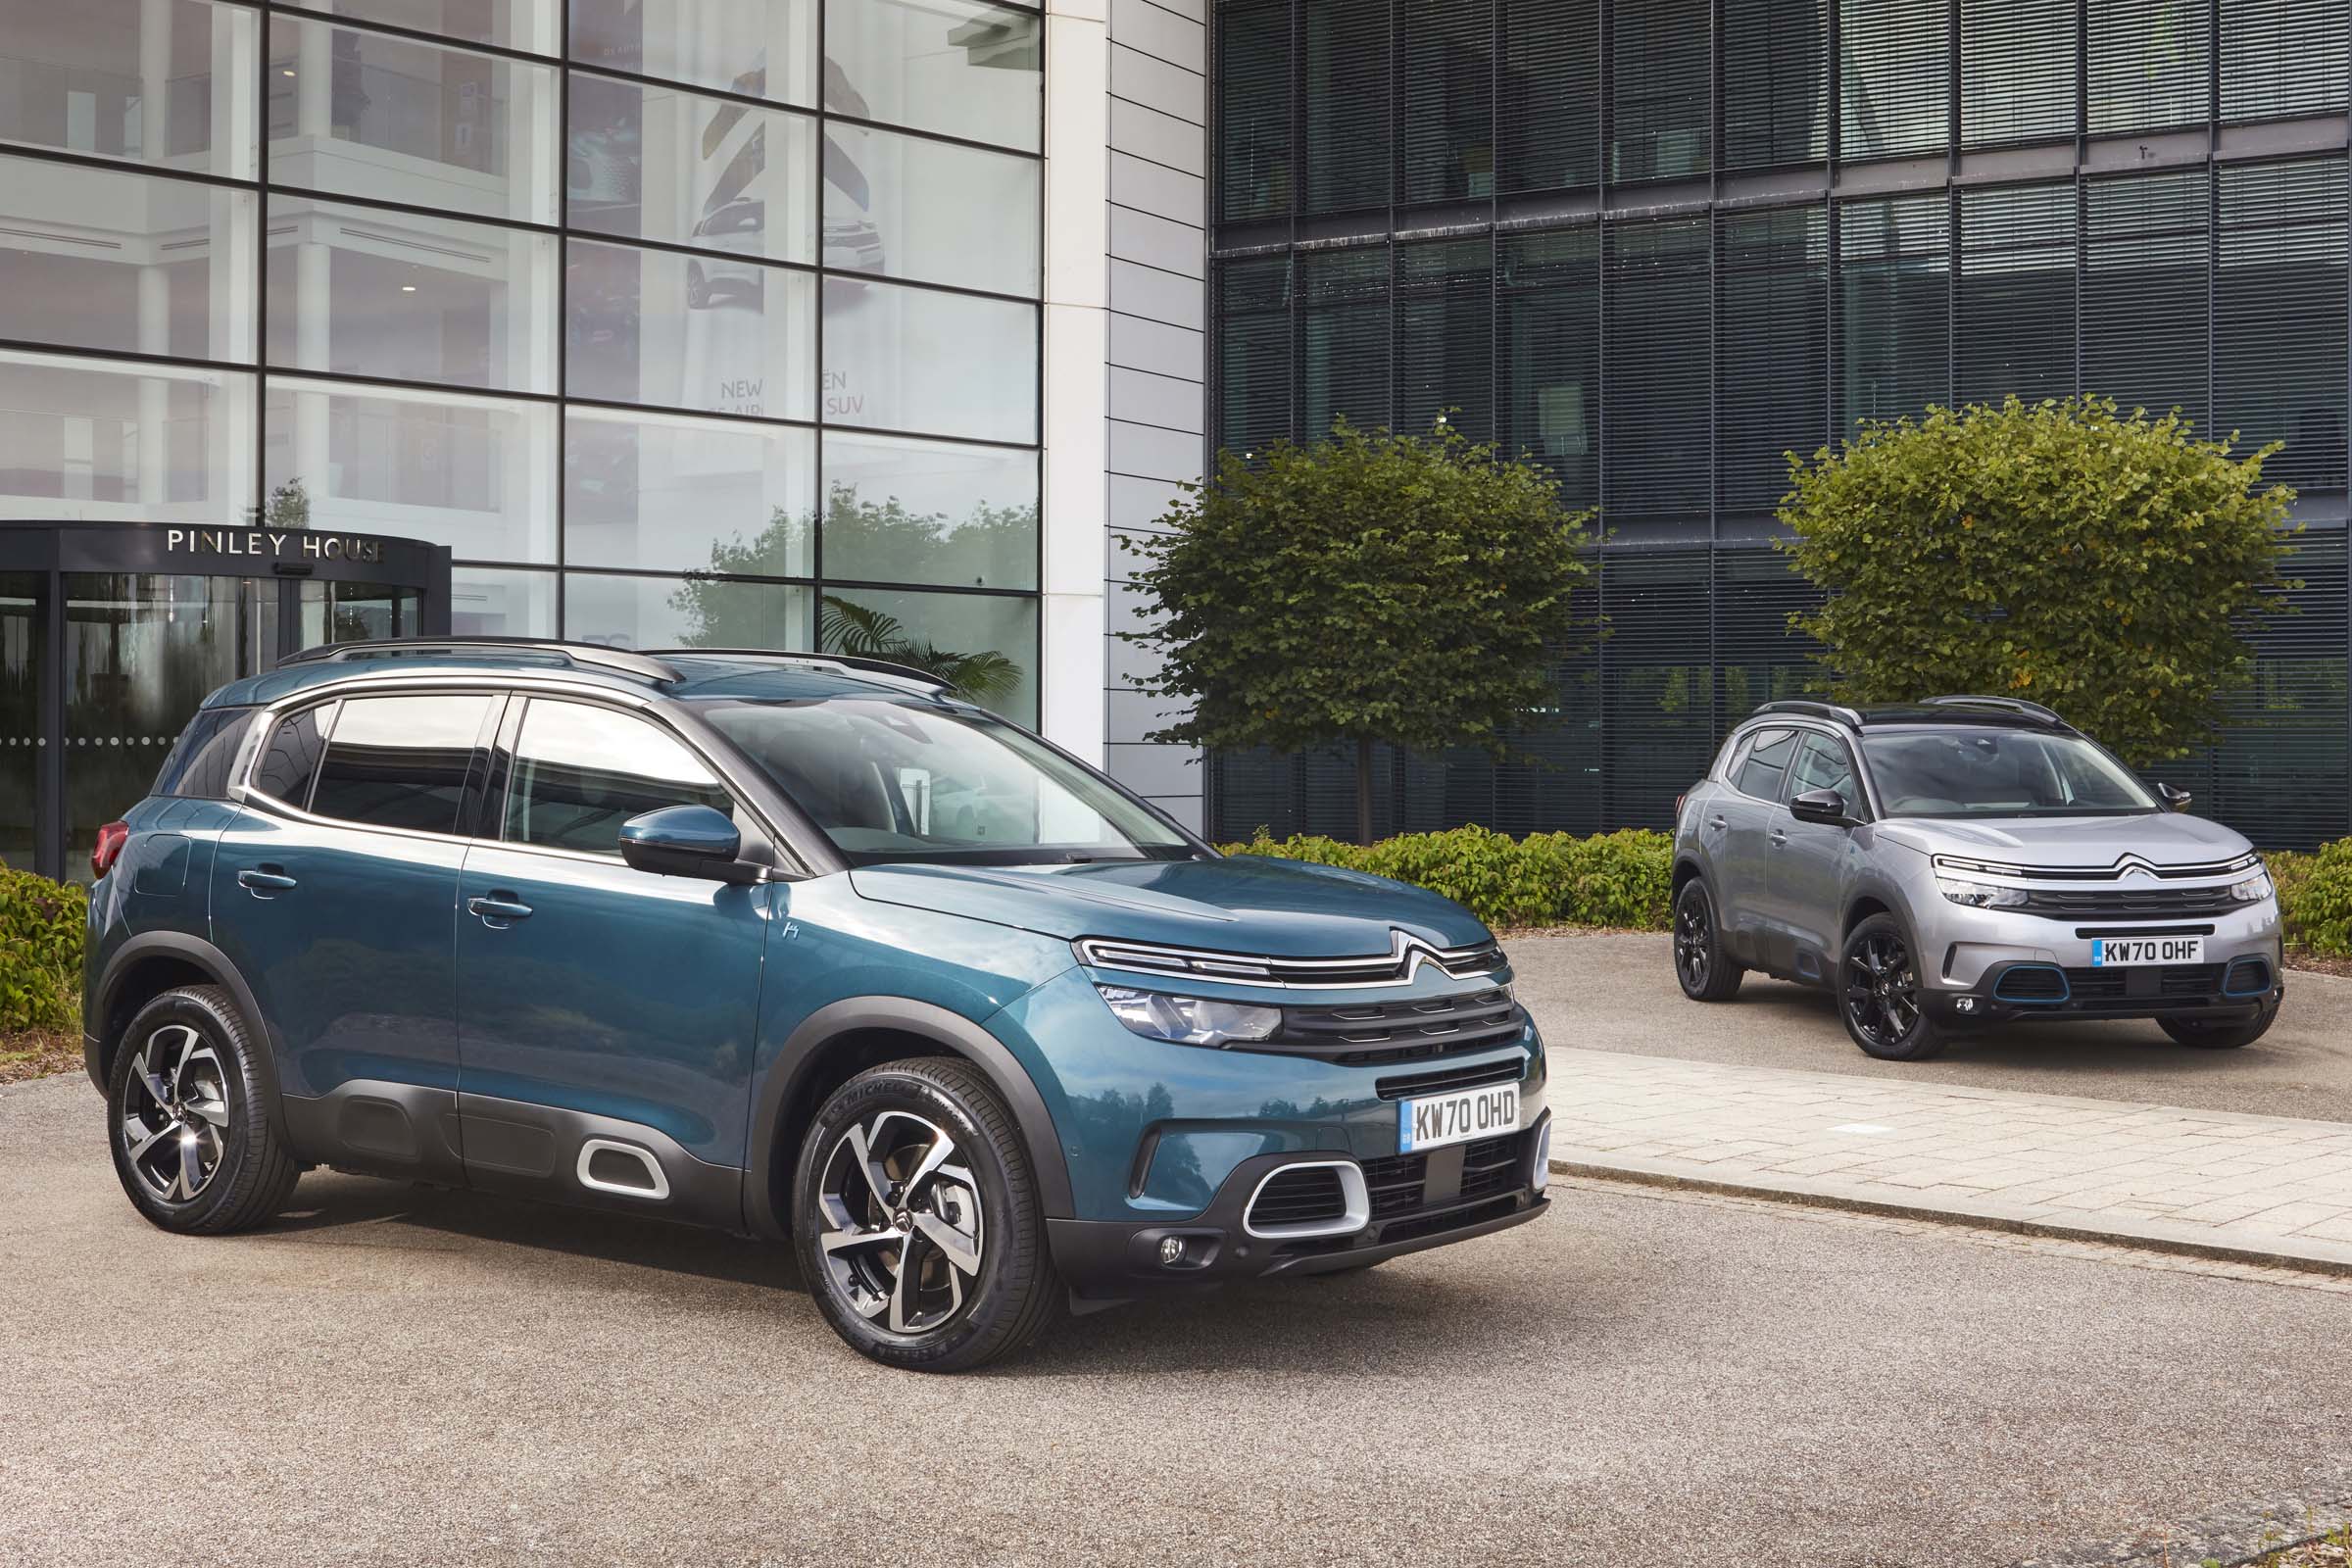 Citroen C5 Aircross Hybrid details, specifications and prices